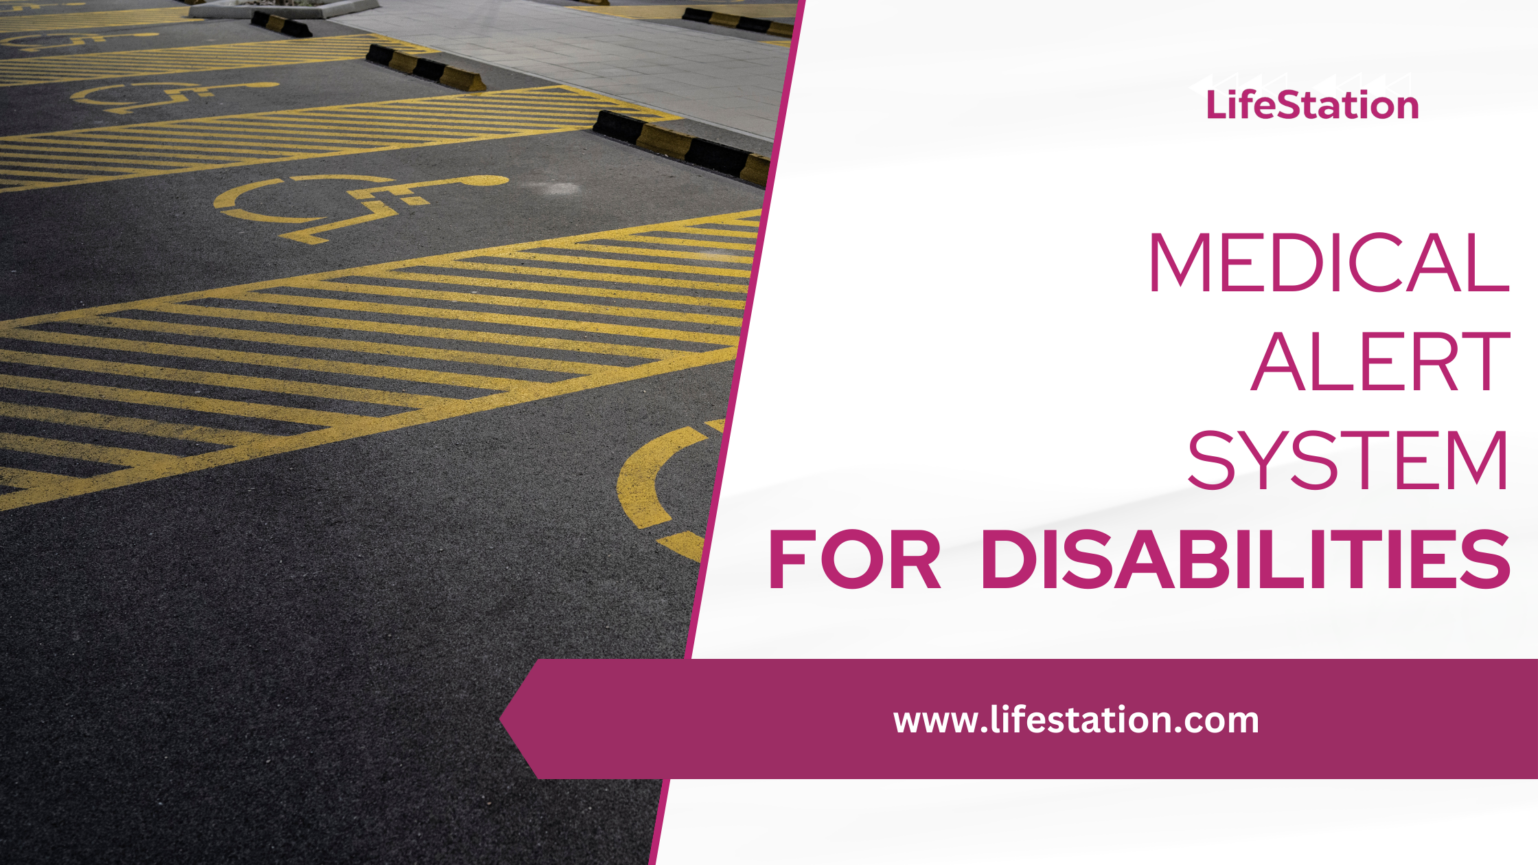 A yellow painted parking space with the text 'LifeStation Medical Alert System for Disabilities' written above it. The LifeStation logo is also displayed.